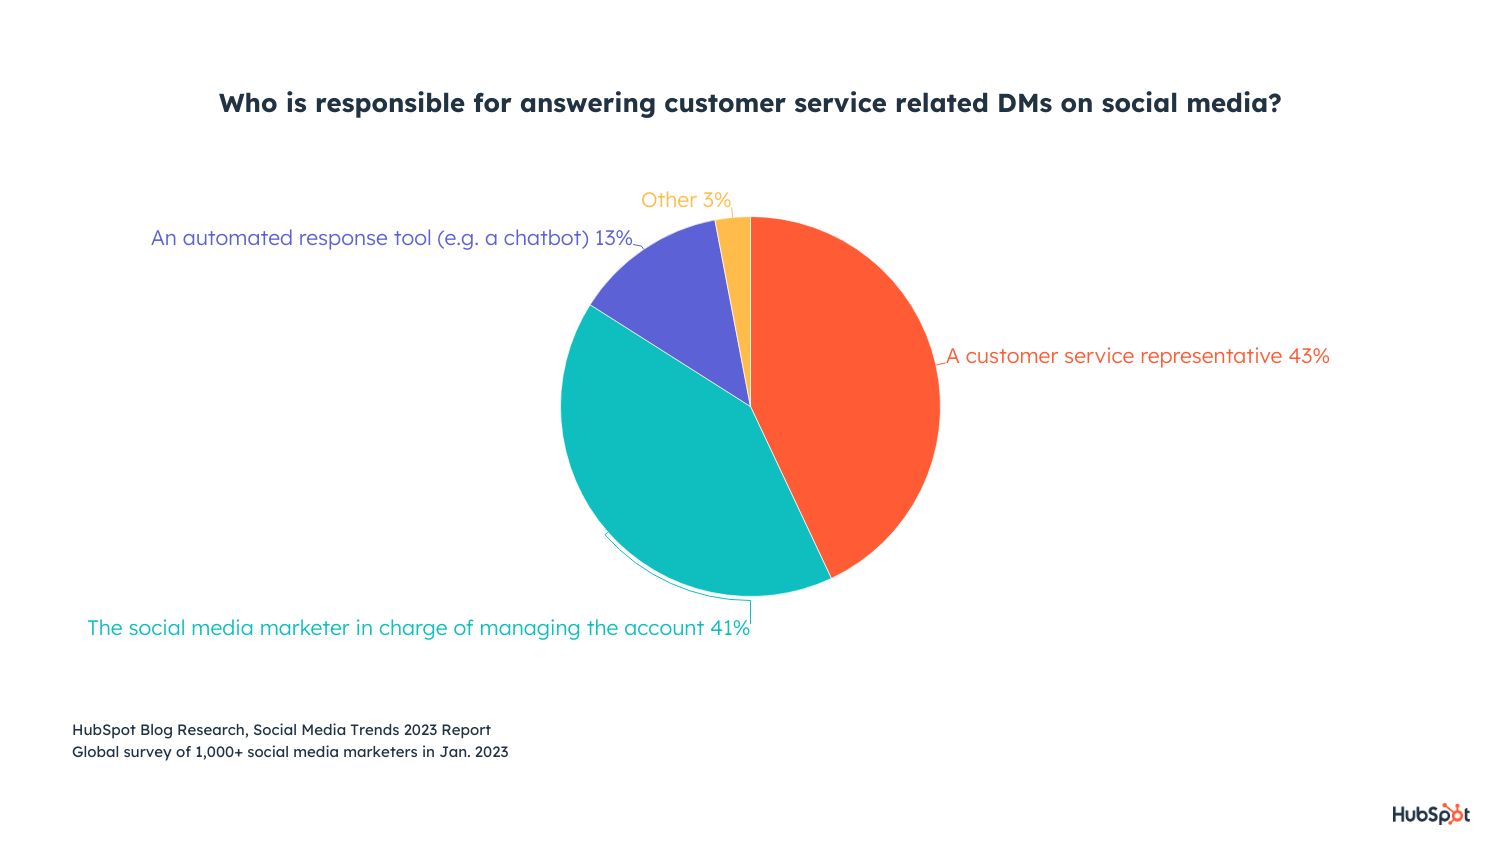 who answers customer service DMs on social media?